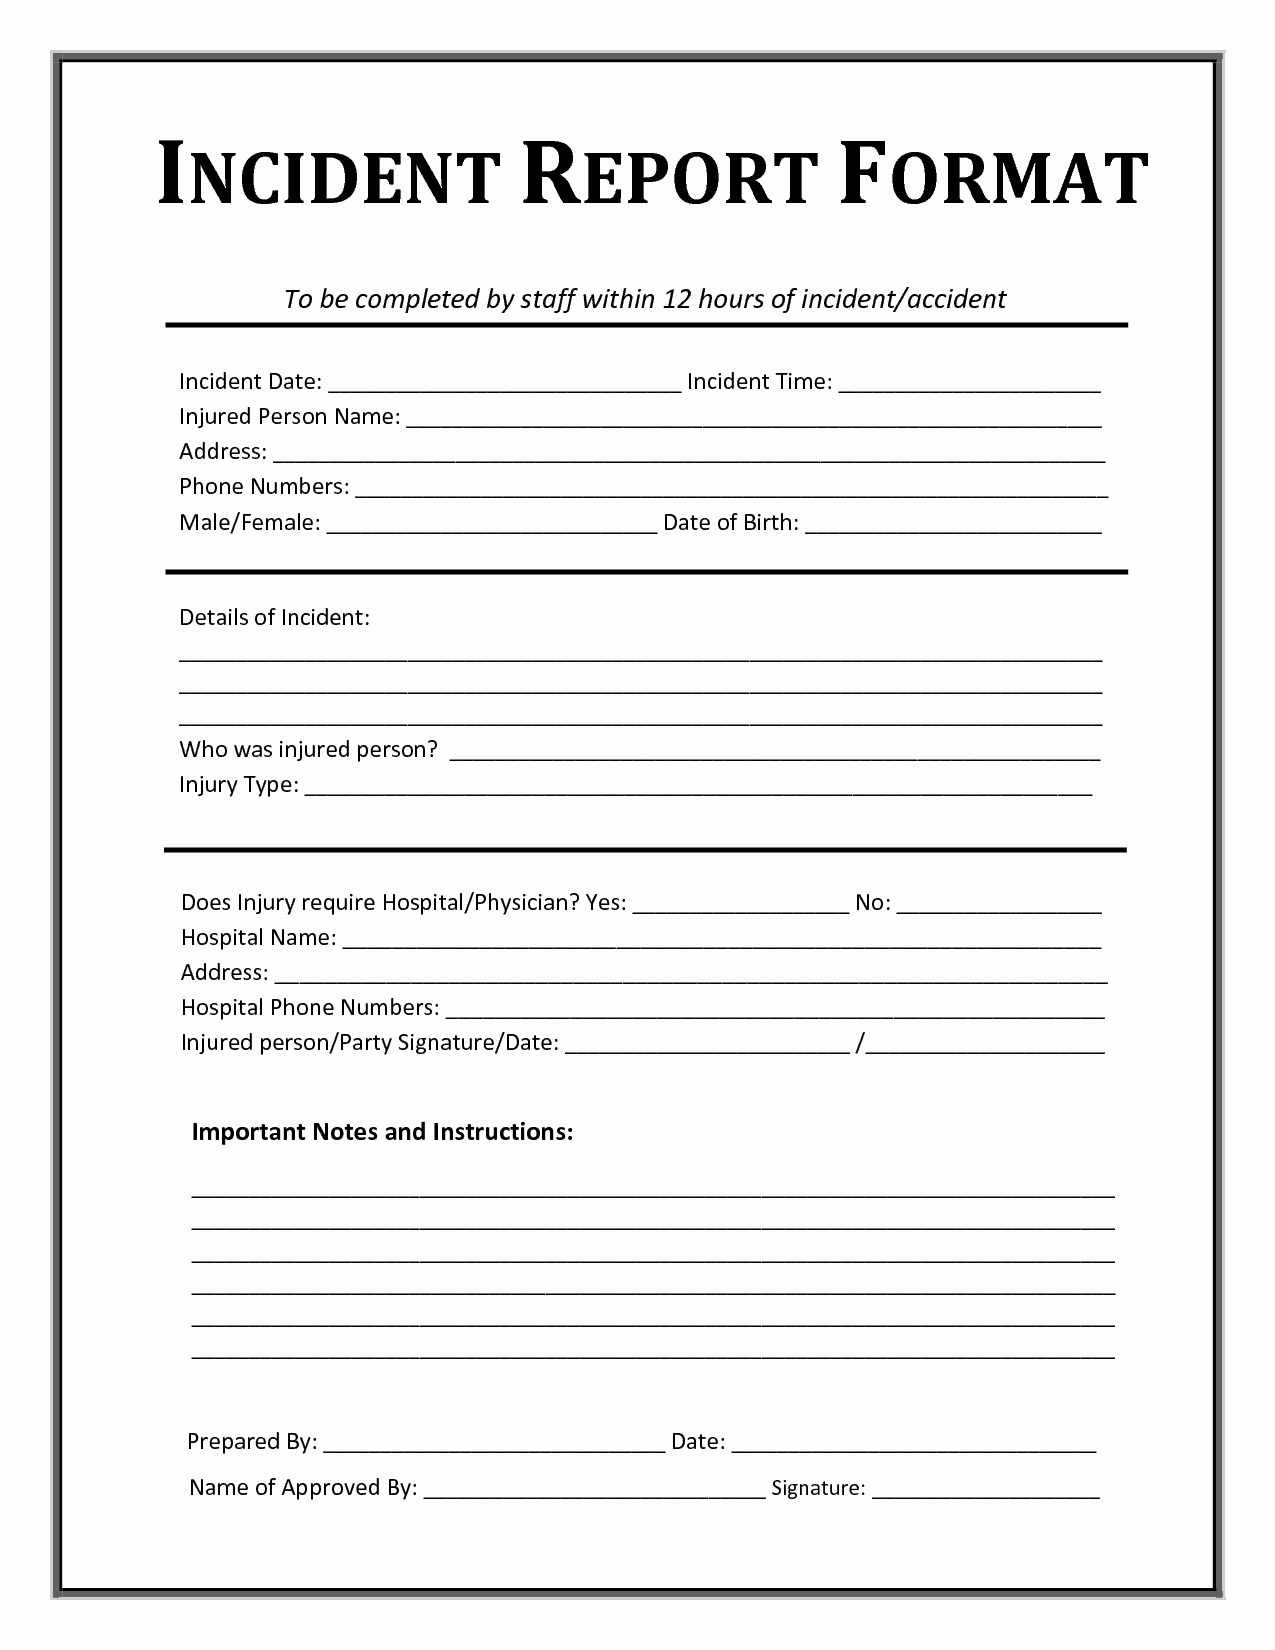 Security Incident Report Template Word Luxury 13 Incident Report Templates Excel Pdf formats